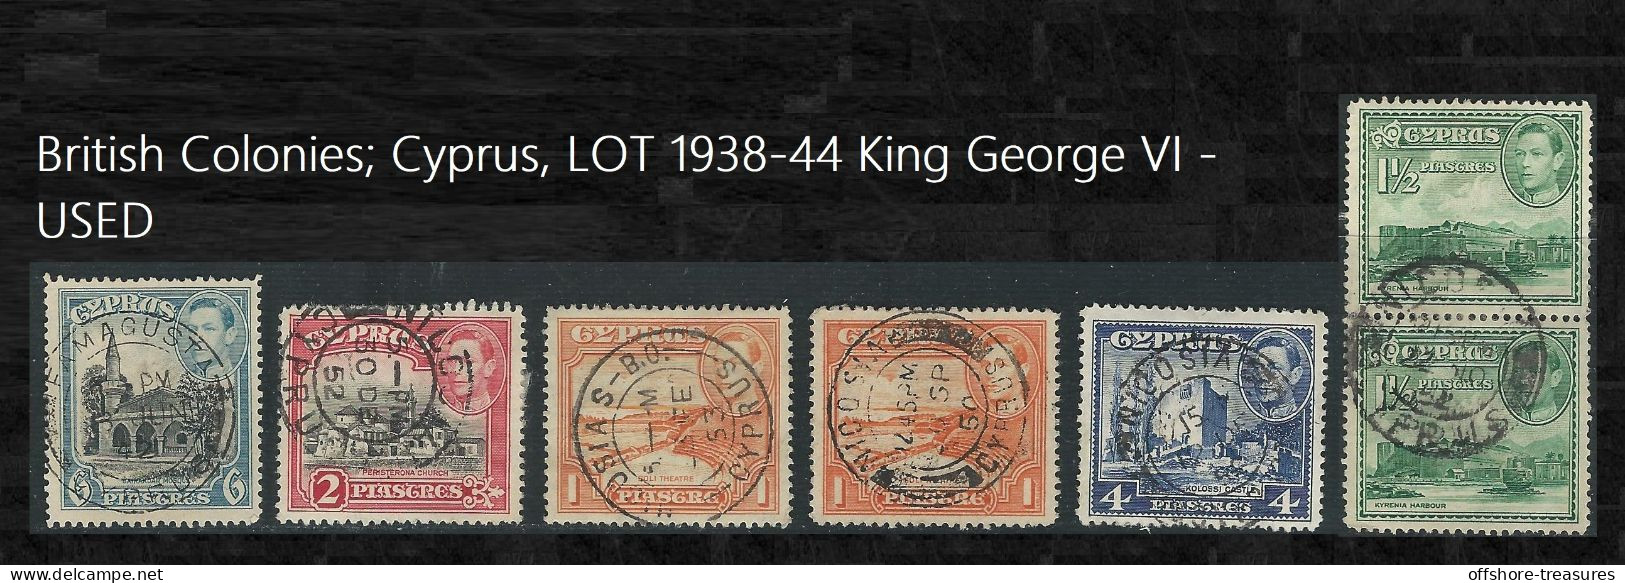 British Colonies; Cyprus Stamp Lot 1938-1944 King George VI - Various Clear Cancellations - 1936-47 King George VI